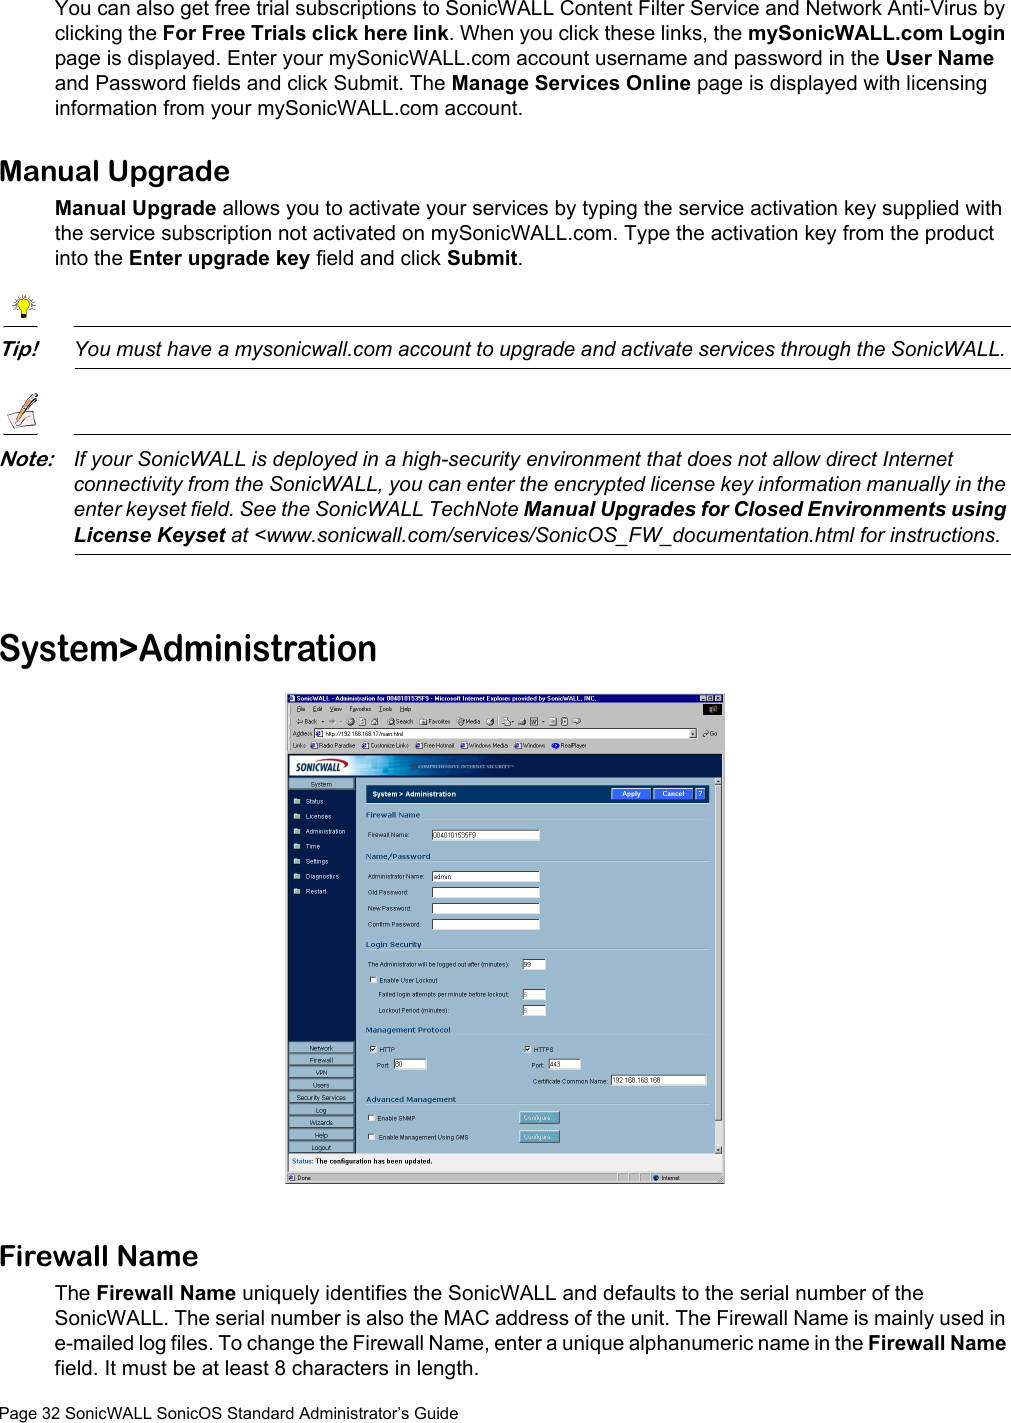 Page 32 SonicWALL SonicOS Standard Administrator’s GuideYou can also get free trial subscriptions to SonicWALL Content Filter Service and Network Anti-Virus by clicking the For Free Trials click here link. When you click these links, the mySonicWALL.com Login page is displayed. Enter your mySonicWALL.com account username and password in the User Name and Password fields and click Submit. The Manage Services Online page is displayed with licensing information from your mySonicWALL.com account.Manual UpgradeManual Upgrade allows you to activate your services by typing the service activation key supplied with the service subscription not activated on mySonicWALL.com. Type the activation key from the product into the Enter upgrade key field and click Submit. Tip!You must have a mysonicwall.com account to upgrade and activate services through the SonicWALL. Note:If your SonicWALL is deployed in a high-security environment that does not allow direct Internet connectivity from the SonicWALL, you can enter the encrypted license key information manually in the enter keyset field. See the SonicWALL TechNote Manual Upgrades for Closed Environments using License Keyset at &lt;www.sonicwall.com/services/SonicOS_FW_documentation.html for instructions.System&gt;AdministrationFirewall NameThe Firewall Name uniquely identifies the SonicWALL and defaults to the serial number of the SonicWALL. The serial number is also the MAC address of the unit. The Firewall Name is mainly used in e-mailed log files. To change the Firewall Name, enter a unique alphanumeric name in the Firewall Name field. It must be at least 8 characters in length.